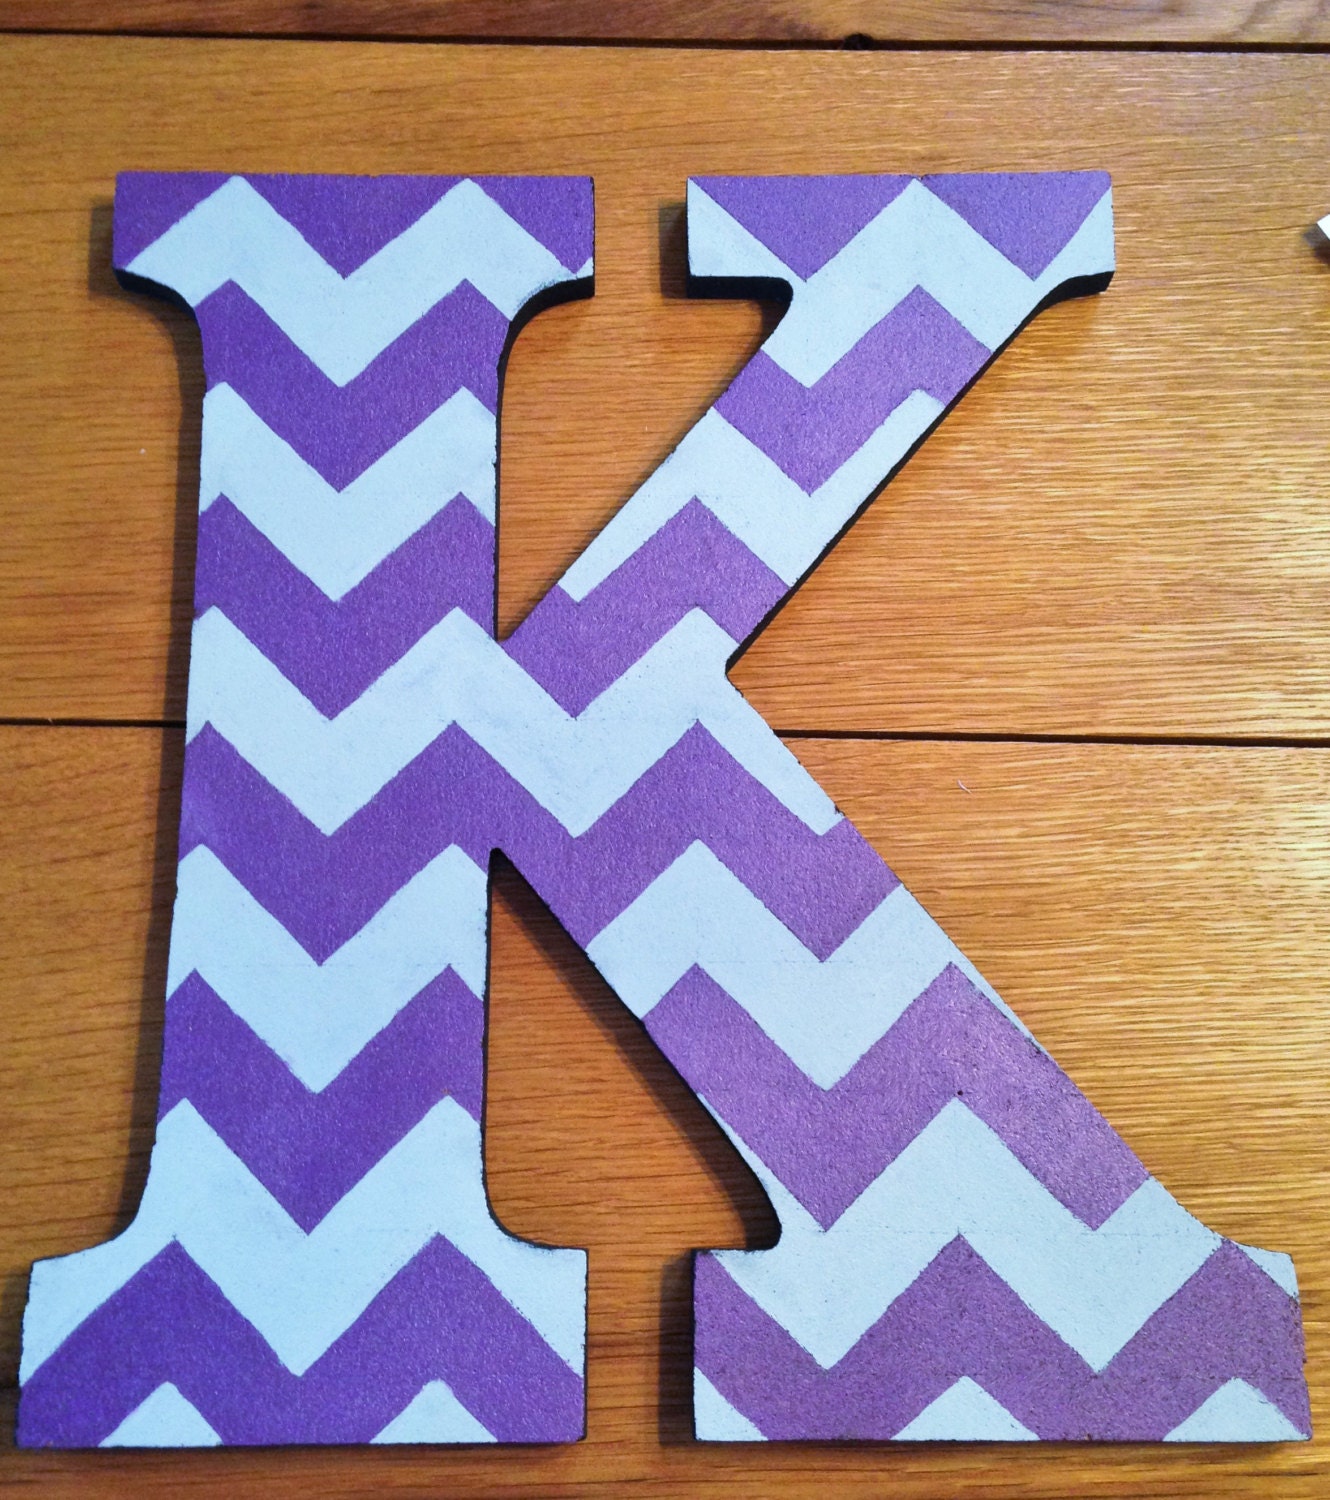 15-inch-painted-bulletin-board-letter-by-craftsbye22-on-etsy